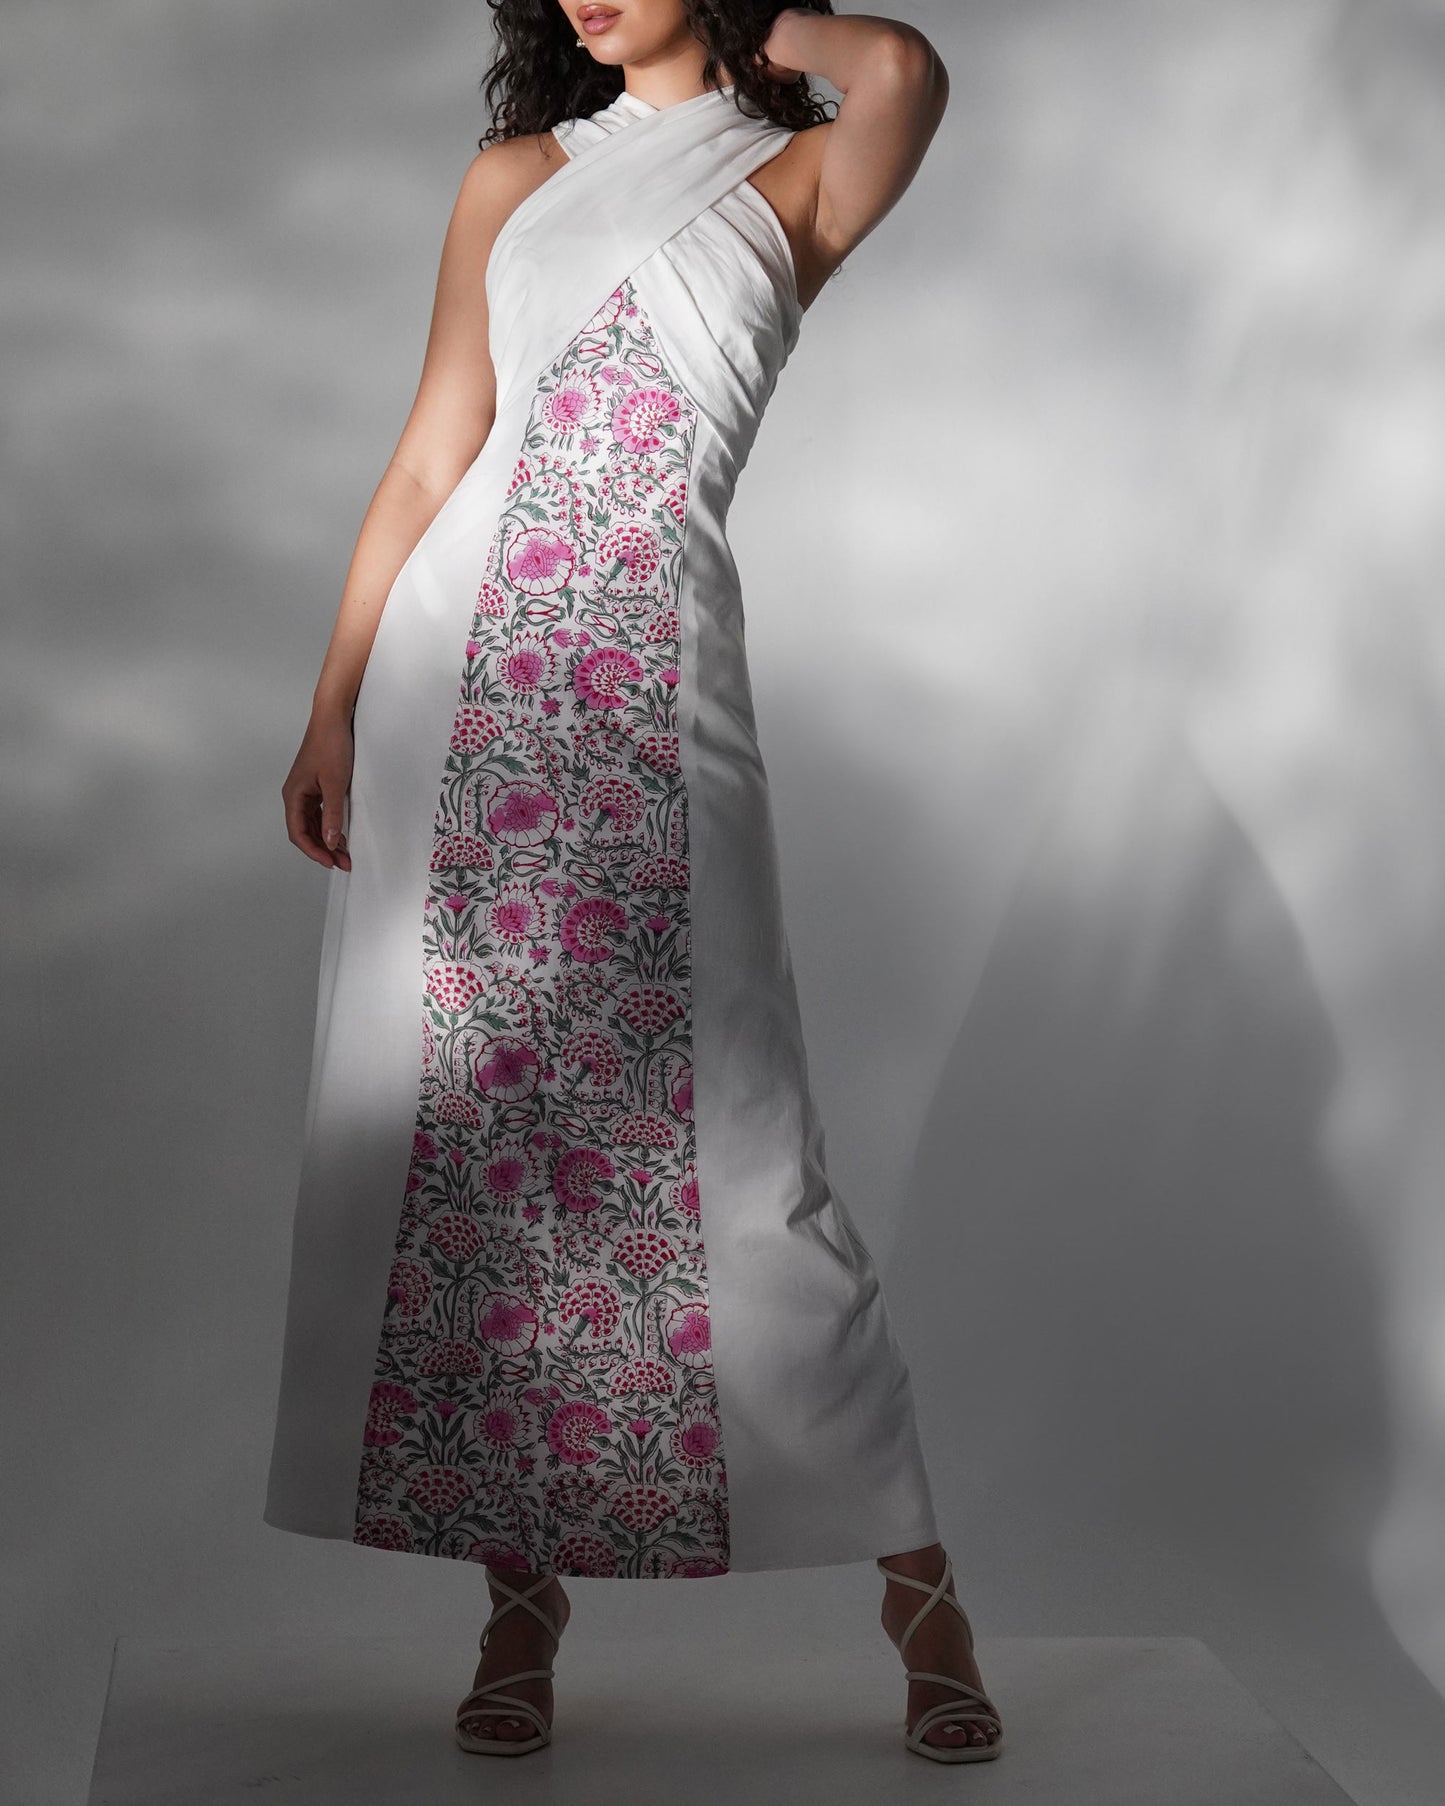 Garden romance pink floral maxi dress topped with longline jacket